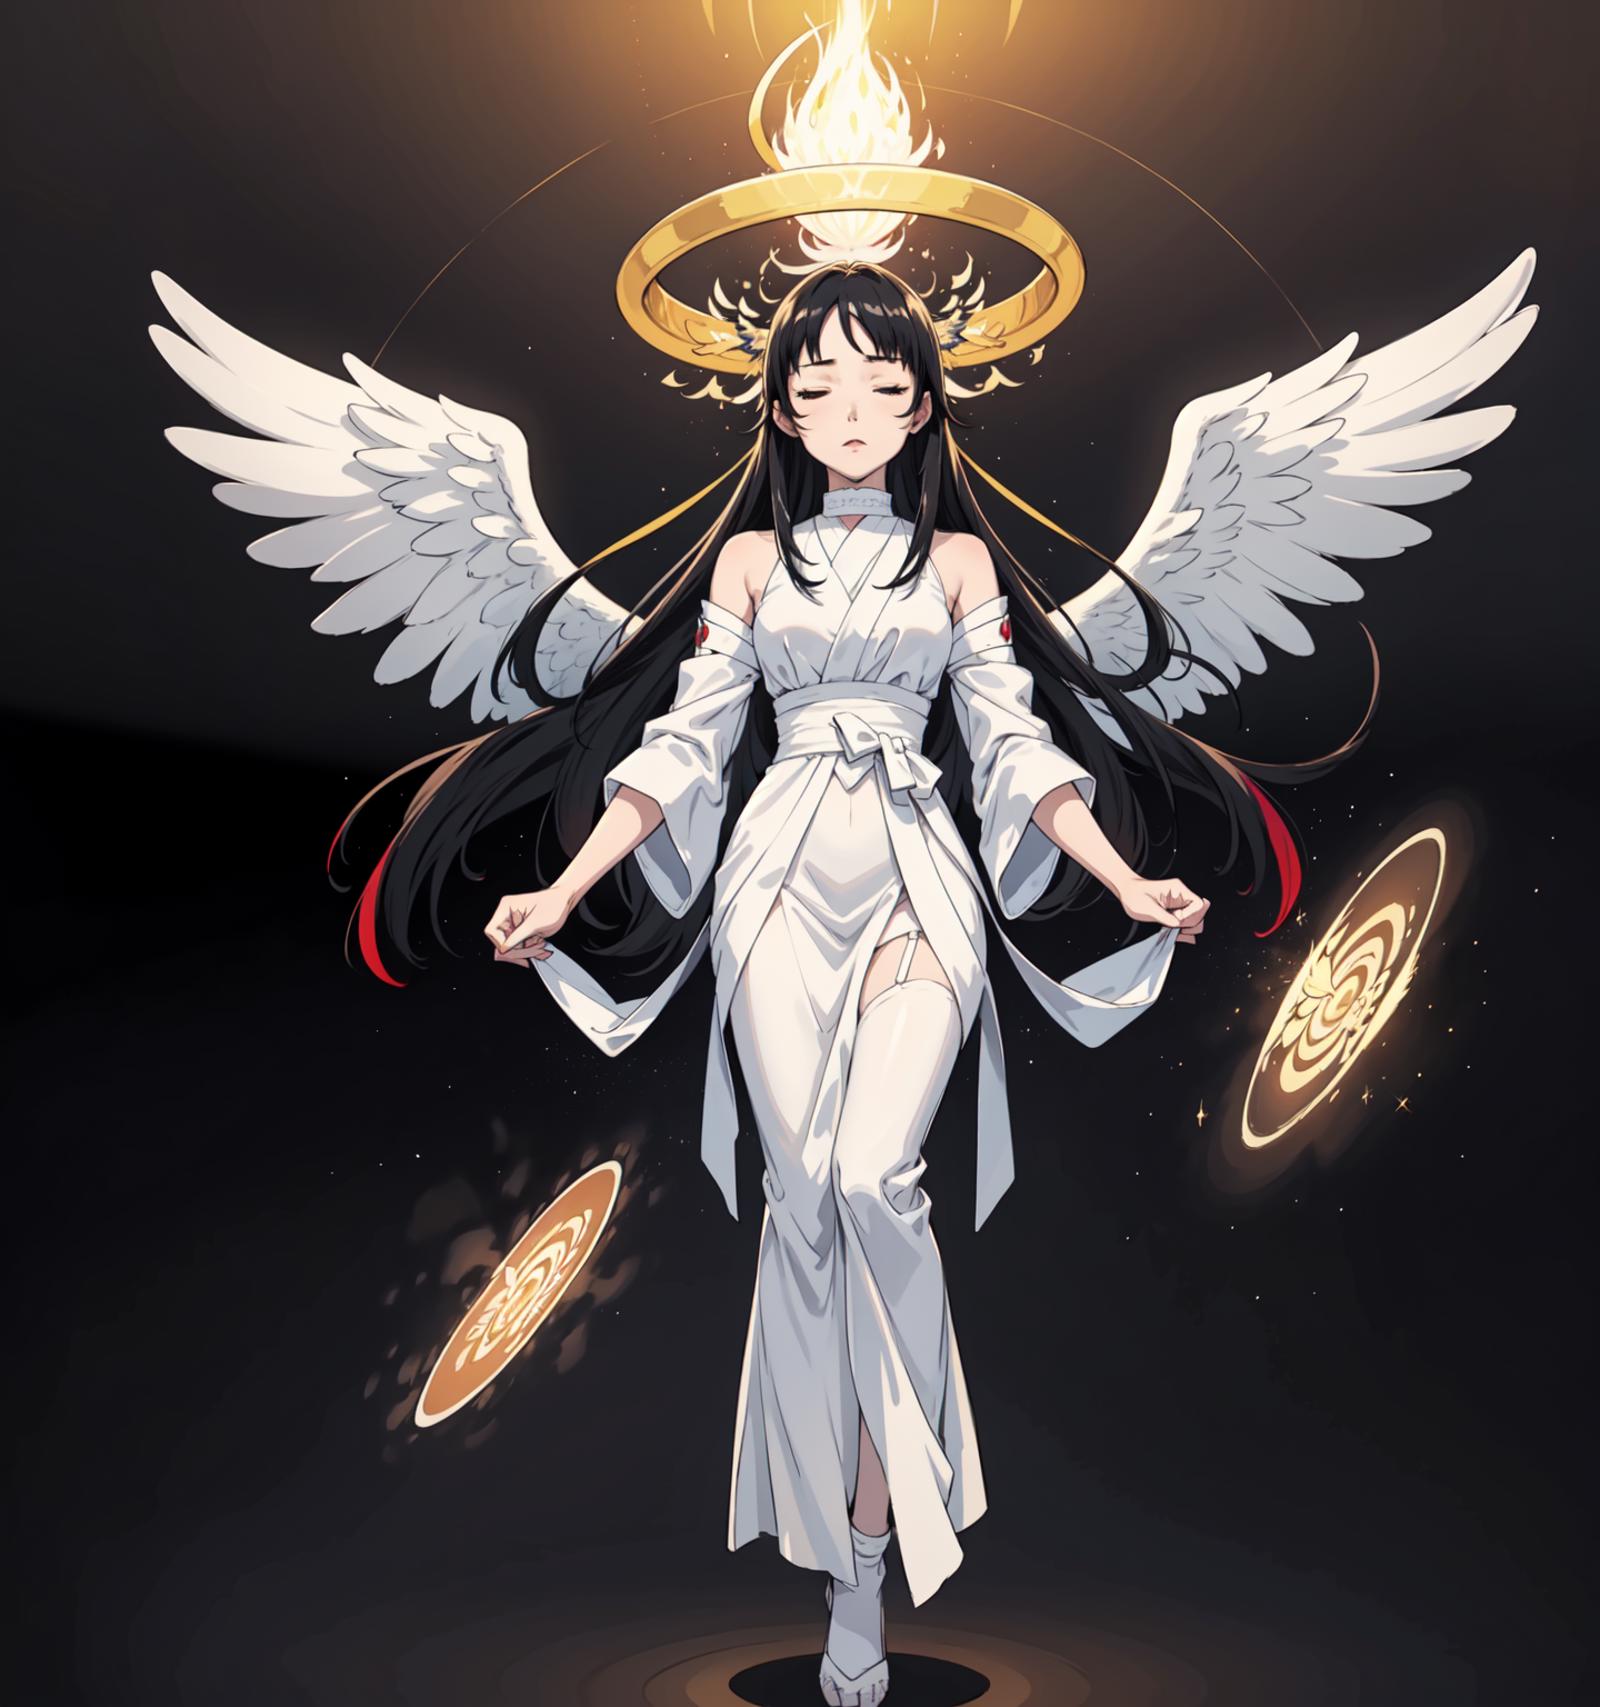 Anime Art of a Woman with Wings and an Angel Halo.